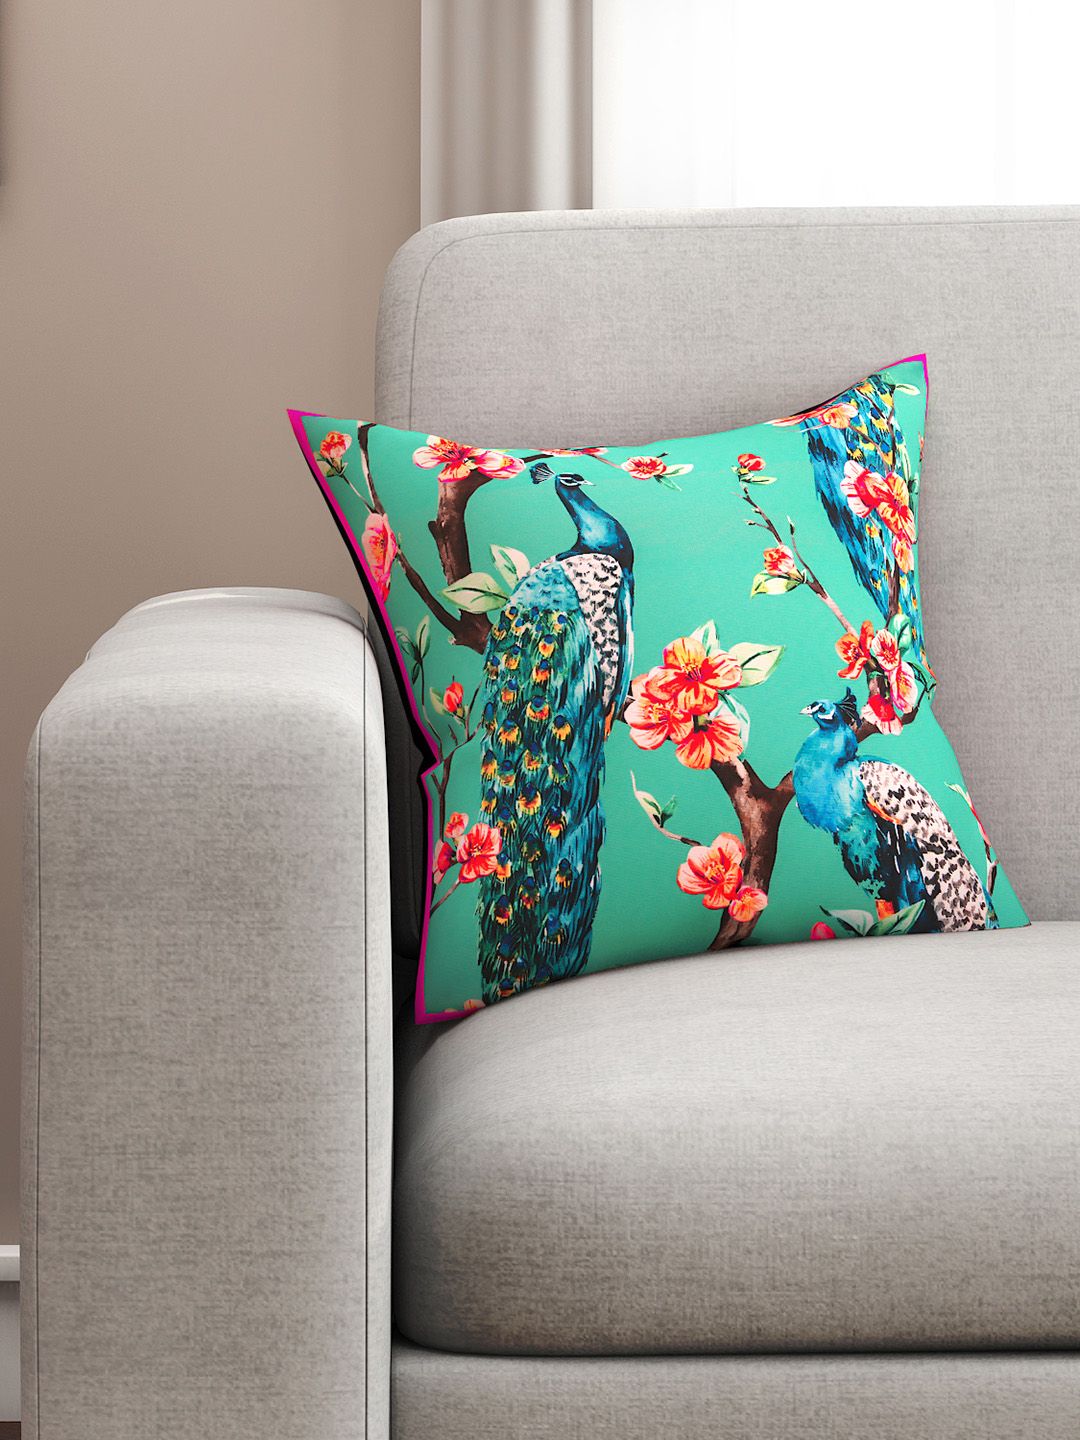 SEJ by Nisha Gupta Green Single Floral Square Cushion Cover Price in India